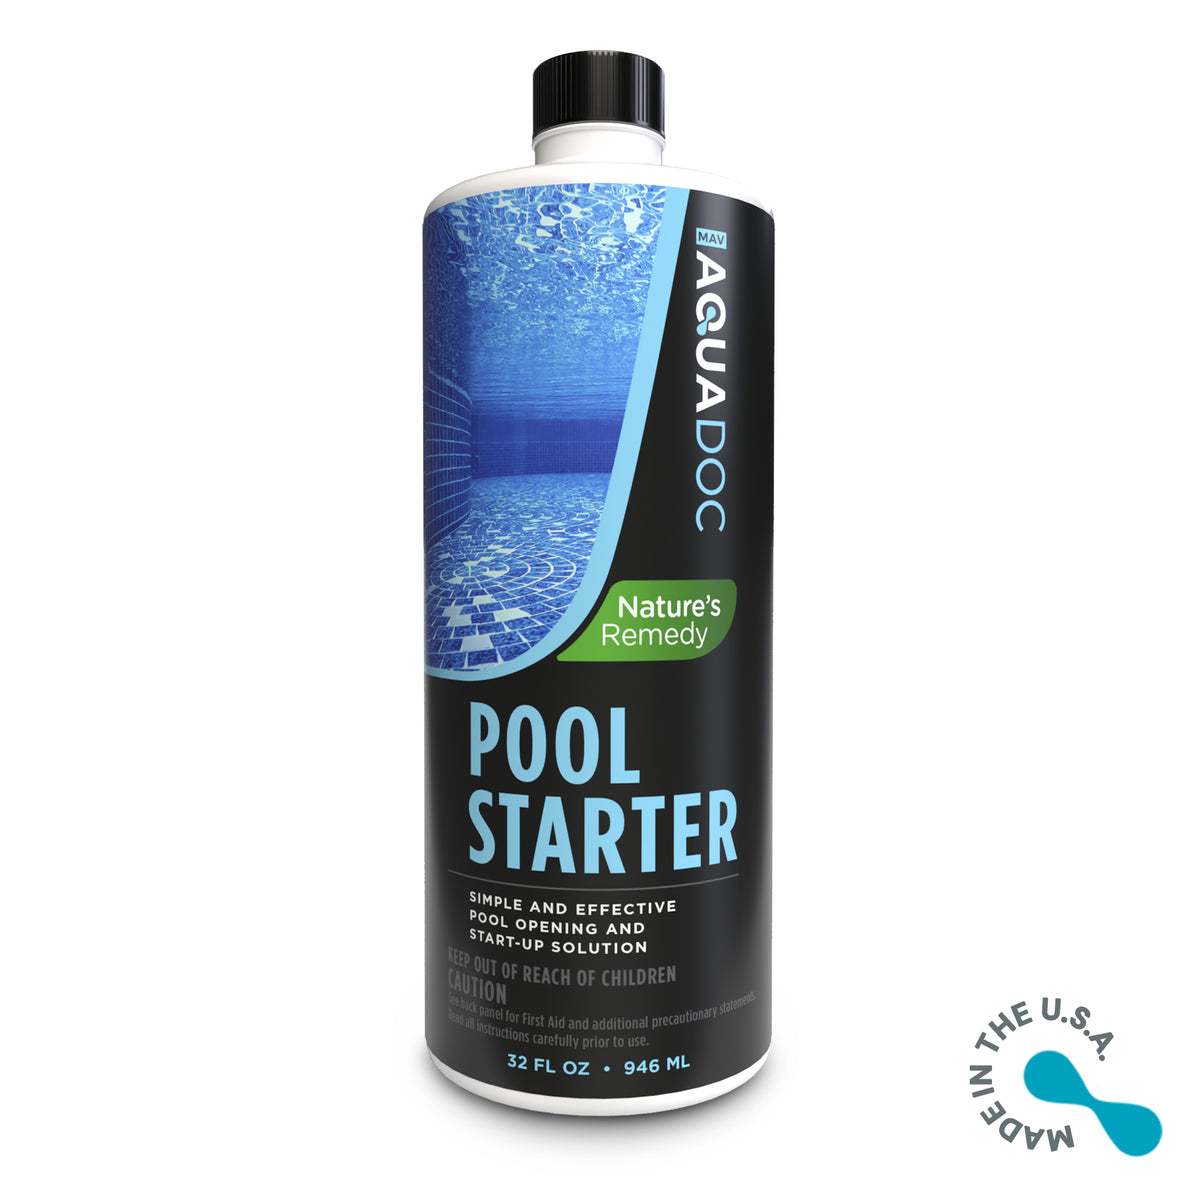 AquaDoc's Pool Starter for inground and above-ground pools